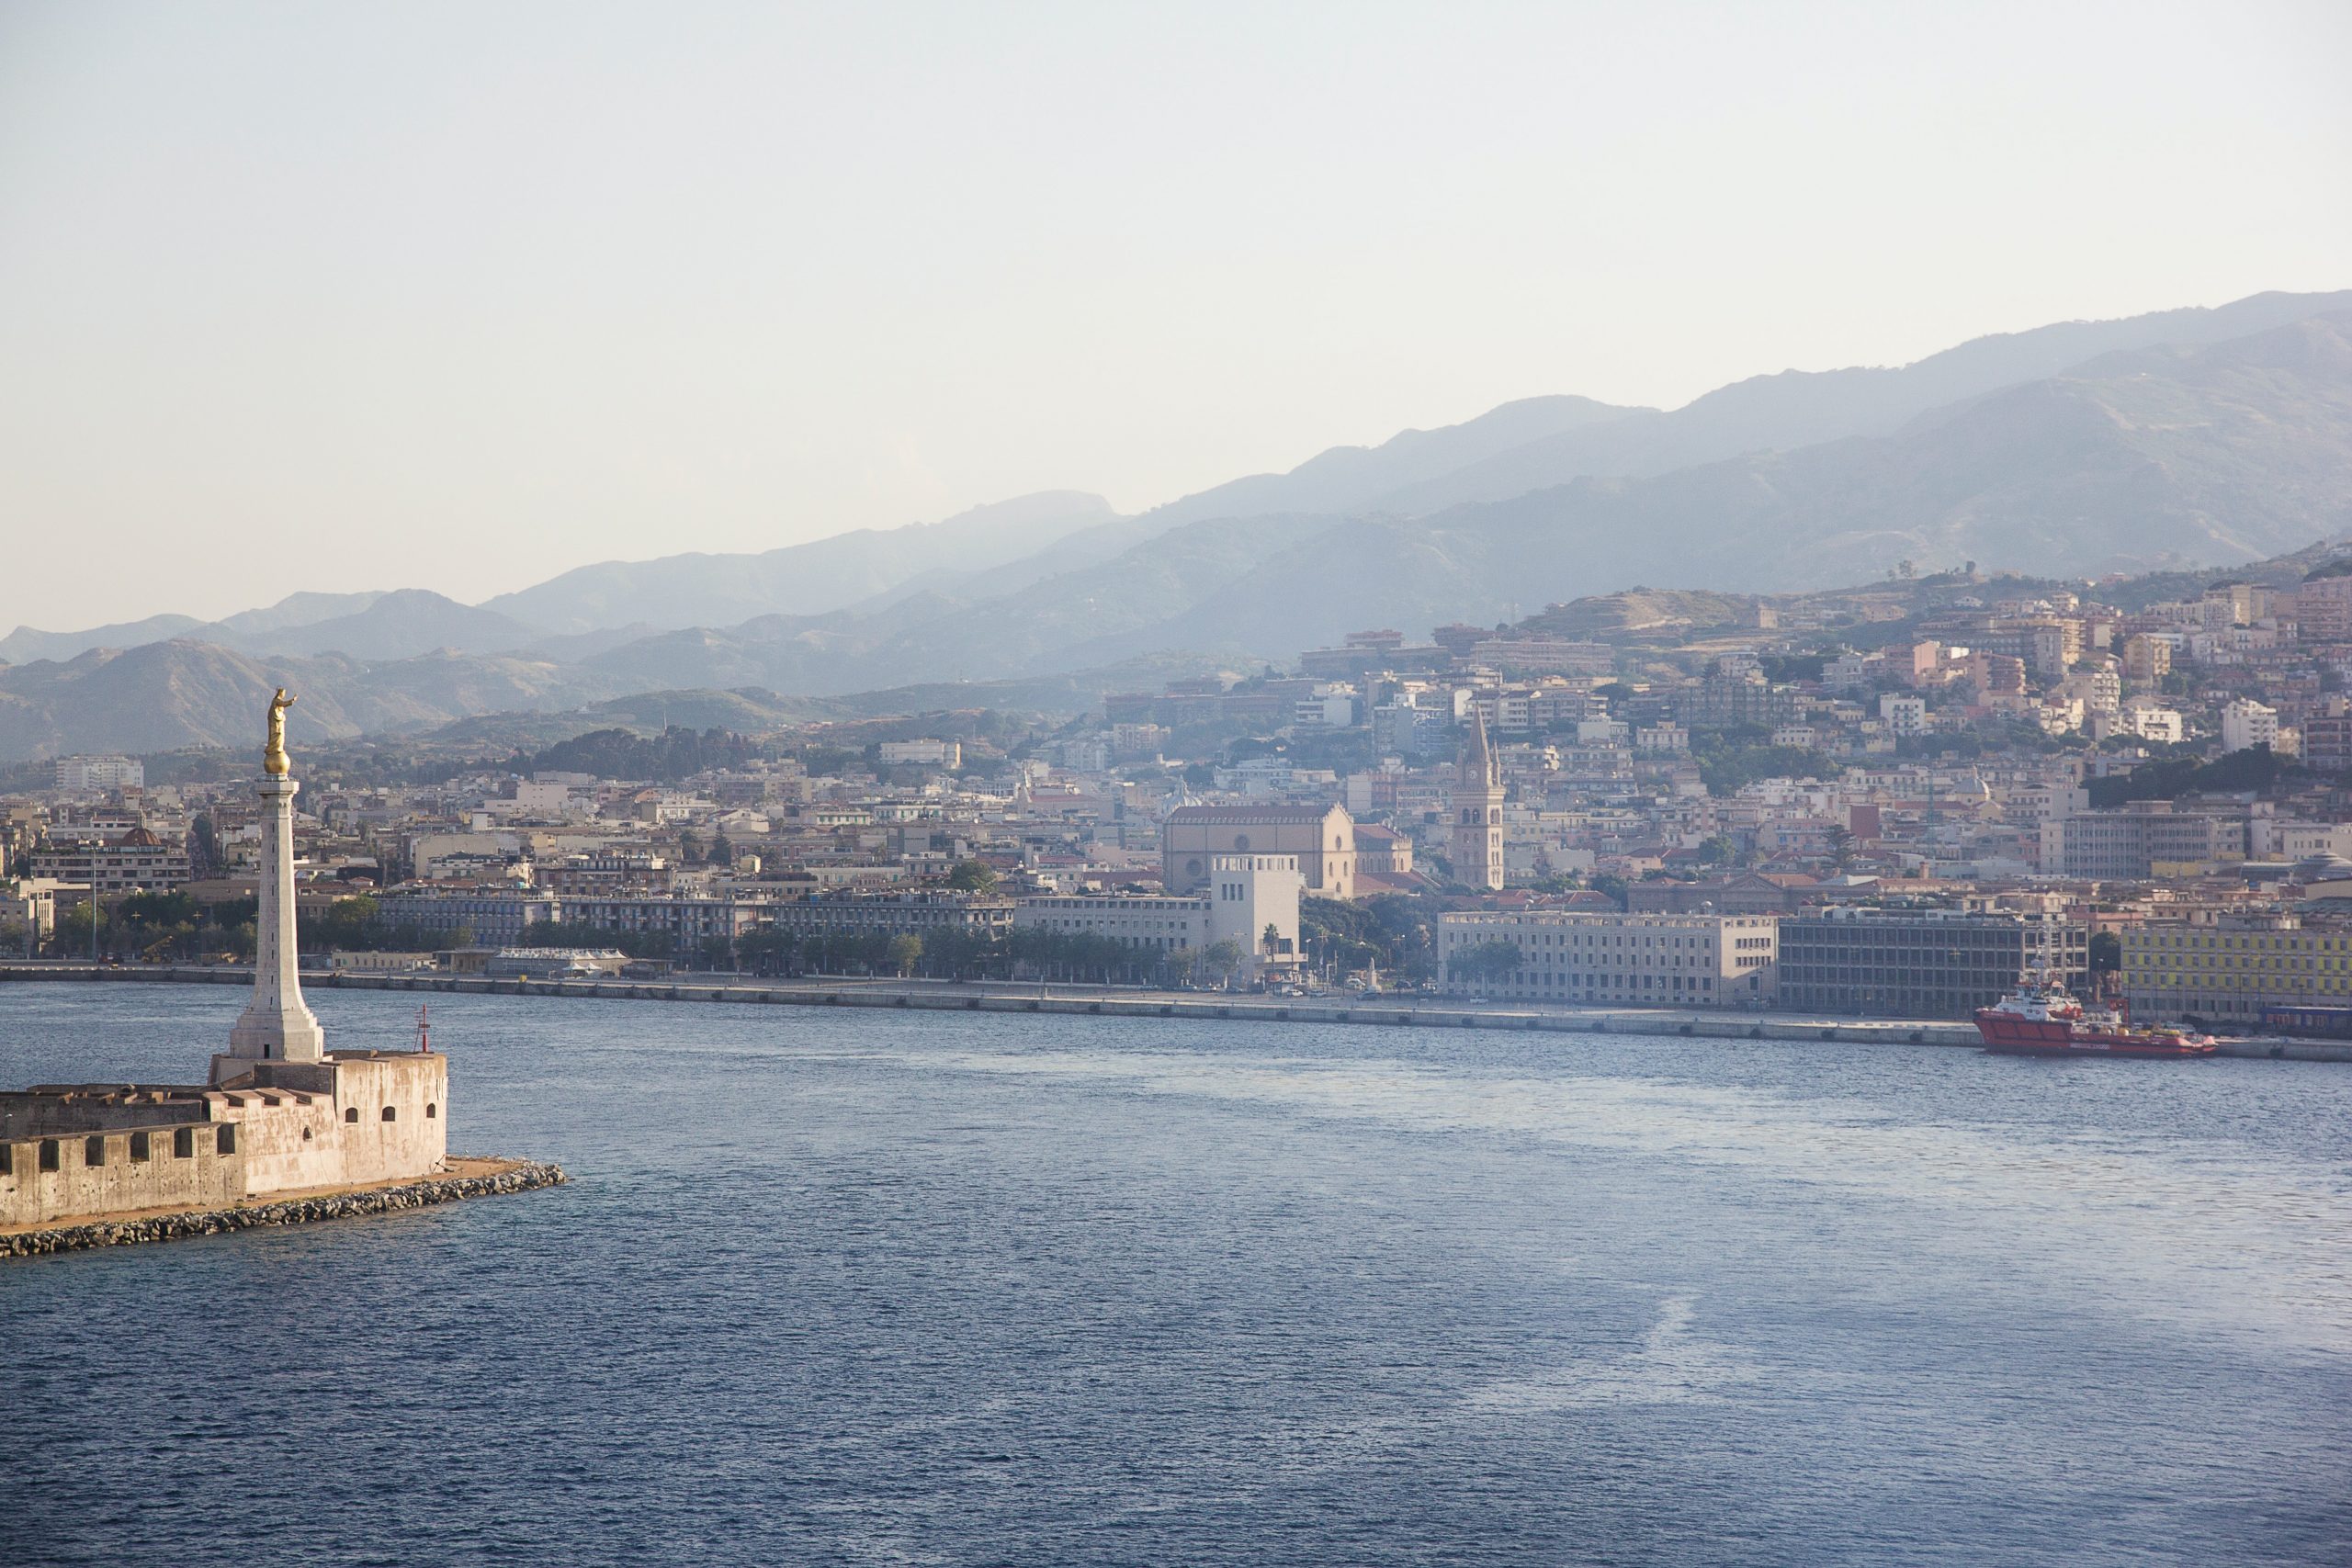 Messina as seen from the shores